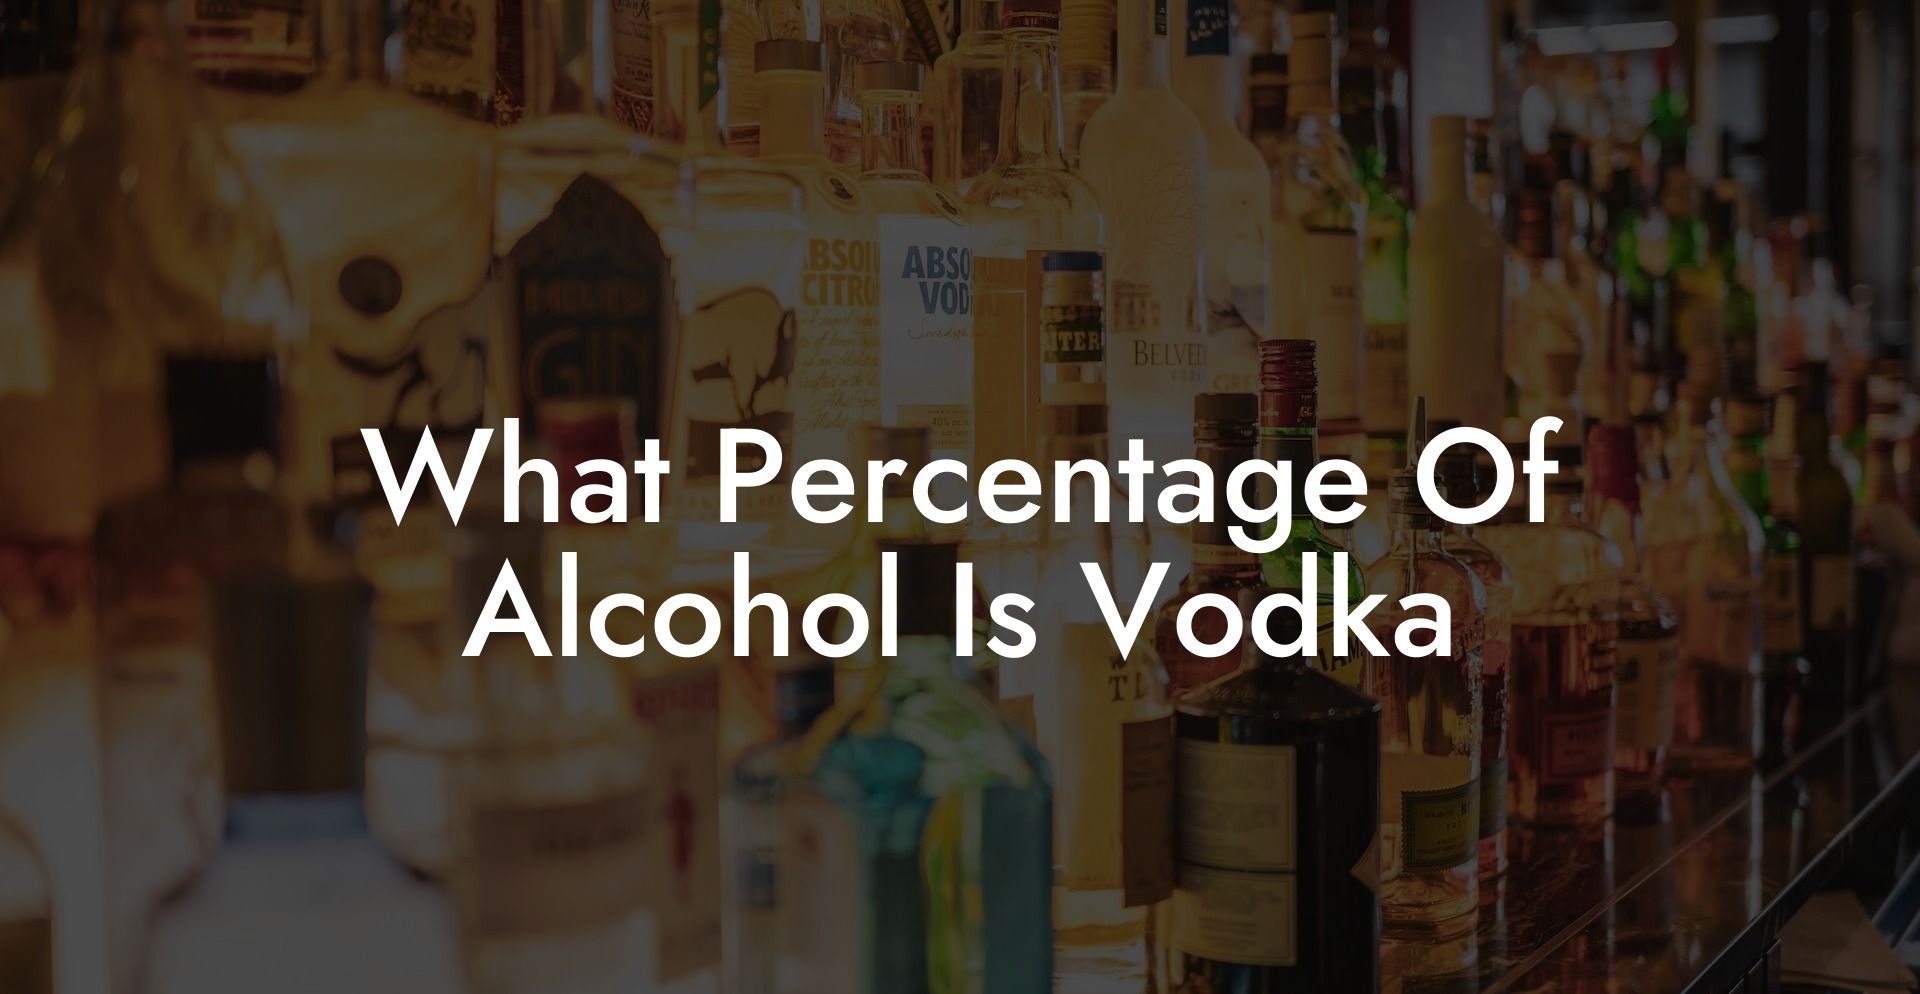 What Percentage Of Alcohol Is Vodka